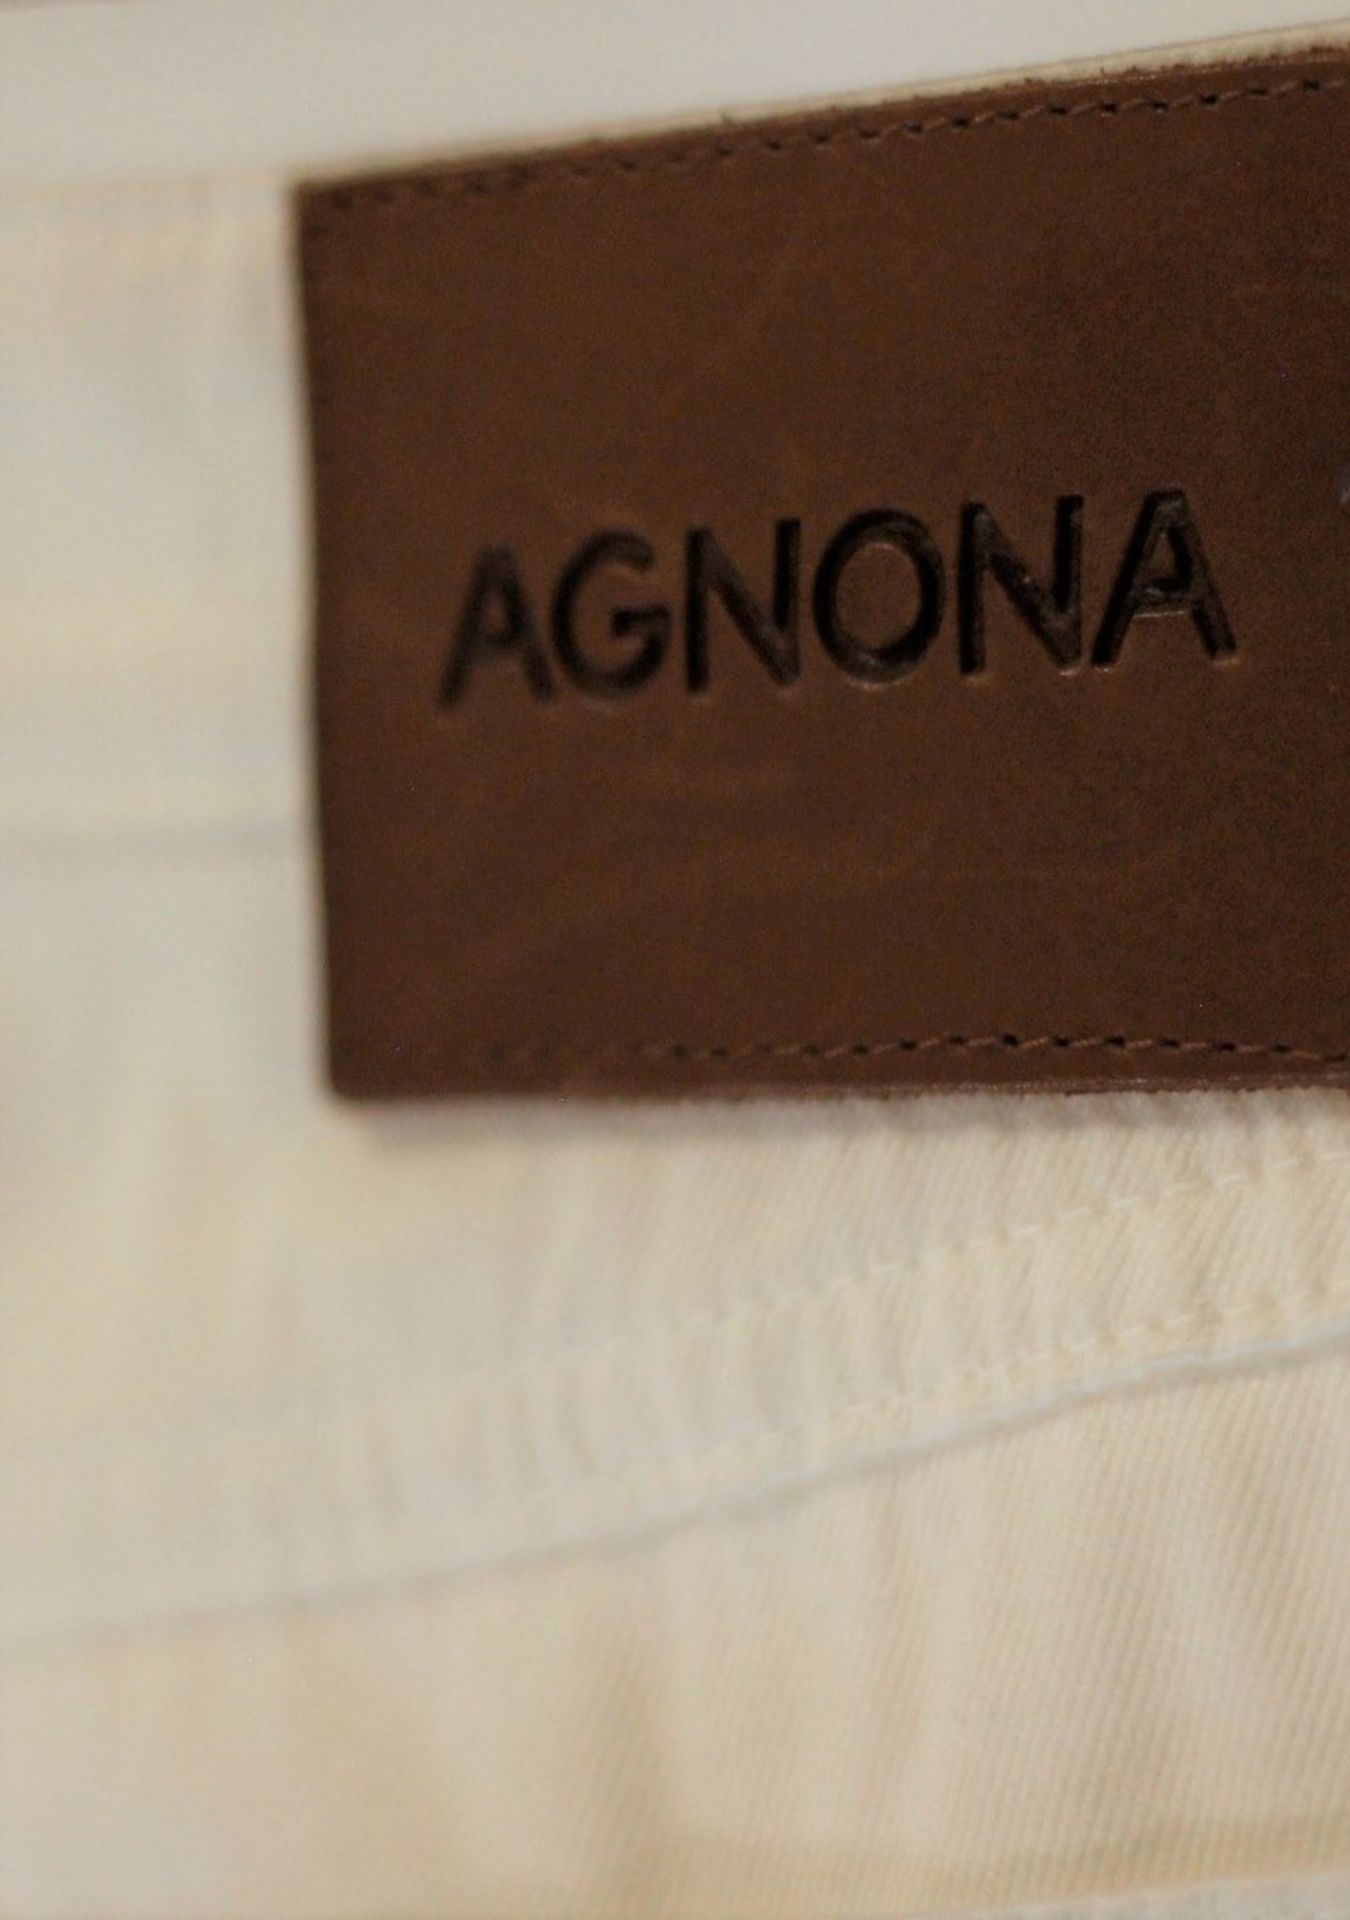 1 x Agnona Cream Jeans - Size: 14 - Material: 98% Cotton, 2% Elastane. Lining 100% Cotton - From a - Image 4 of 6